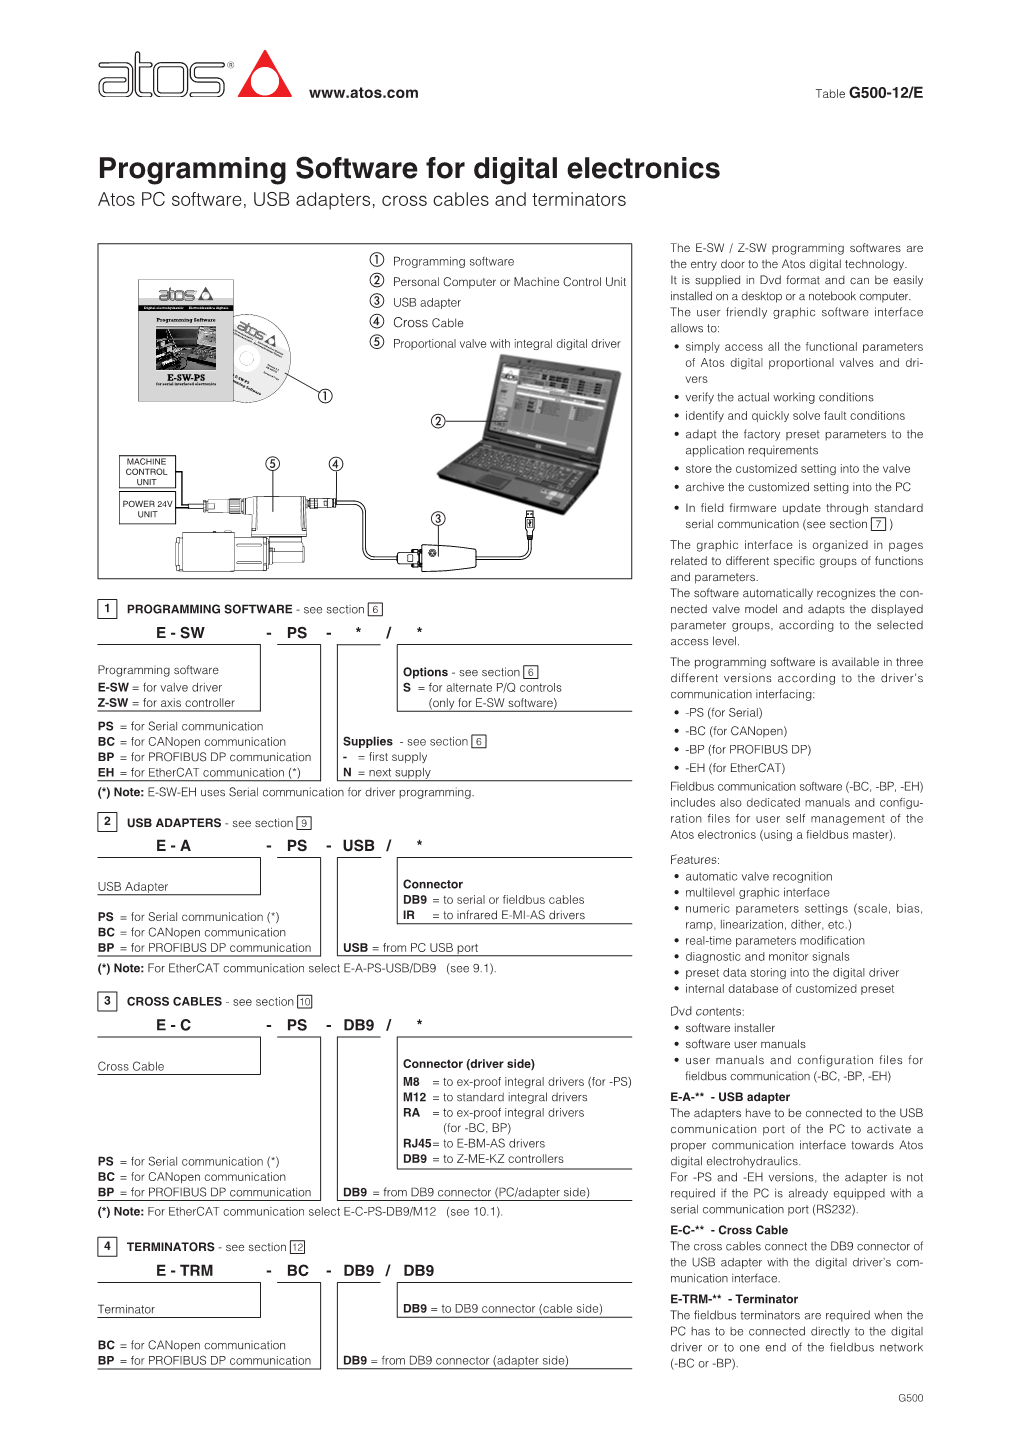 Programming Software for Digital Electronics Atos PC Software, USB Adapters, Cross Cables and Terminators